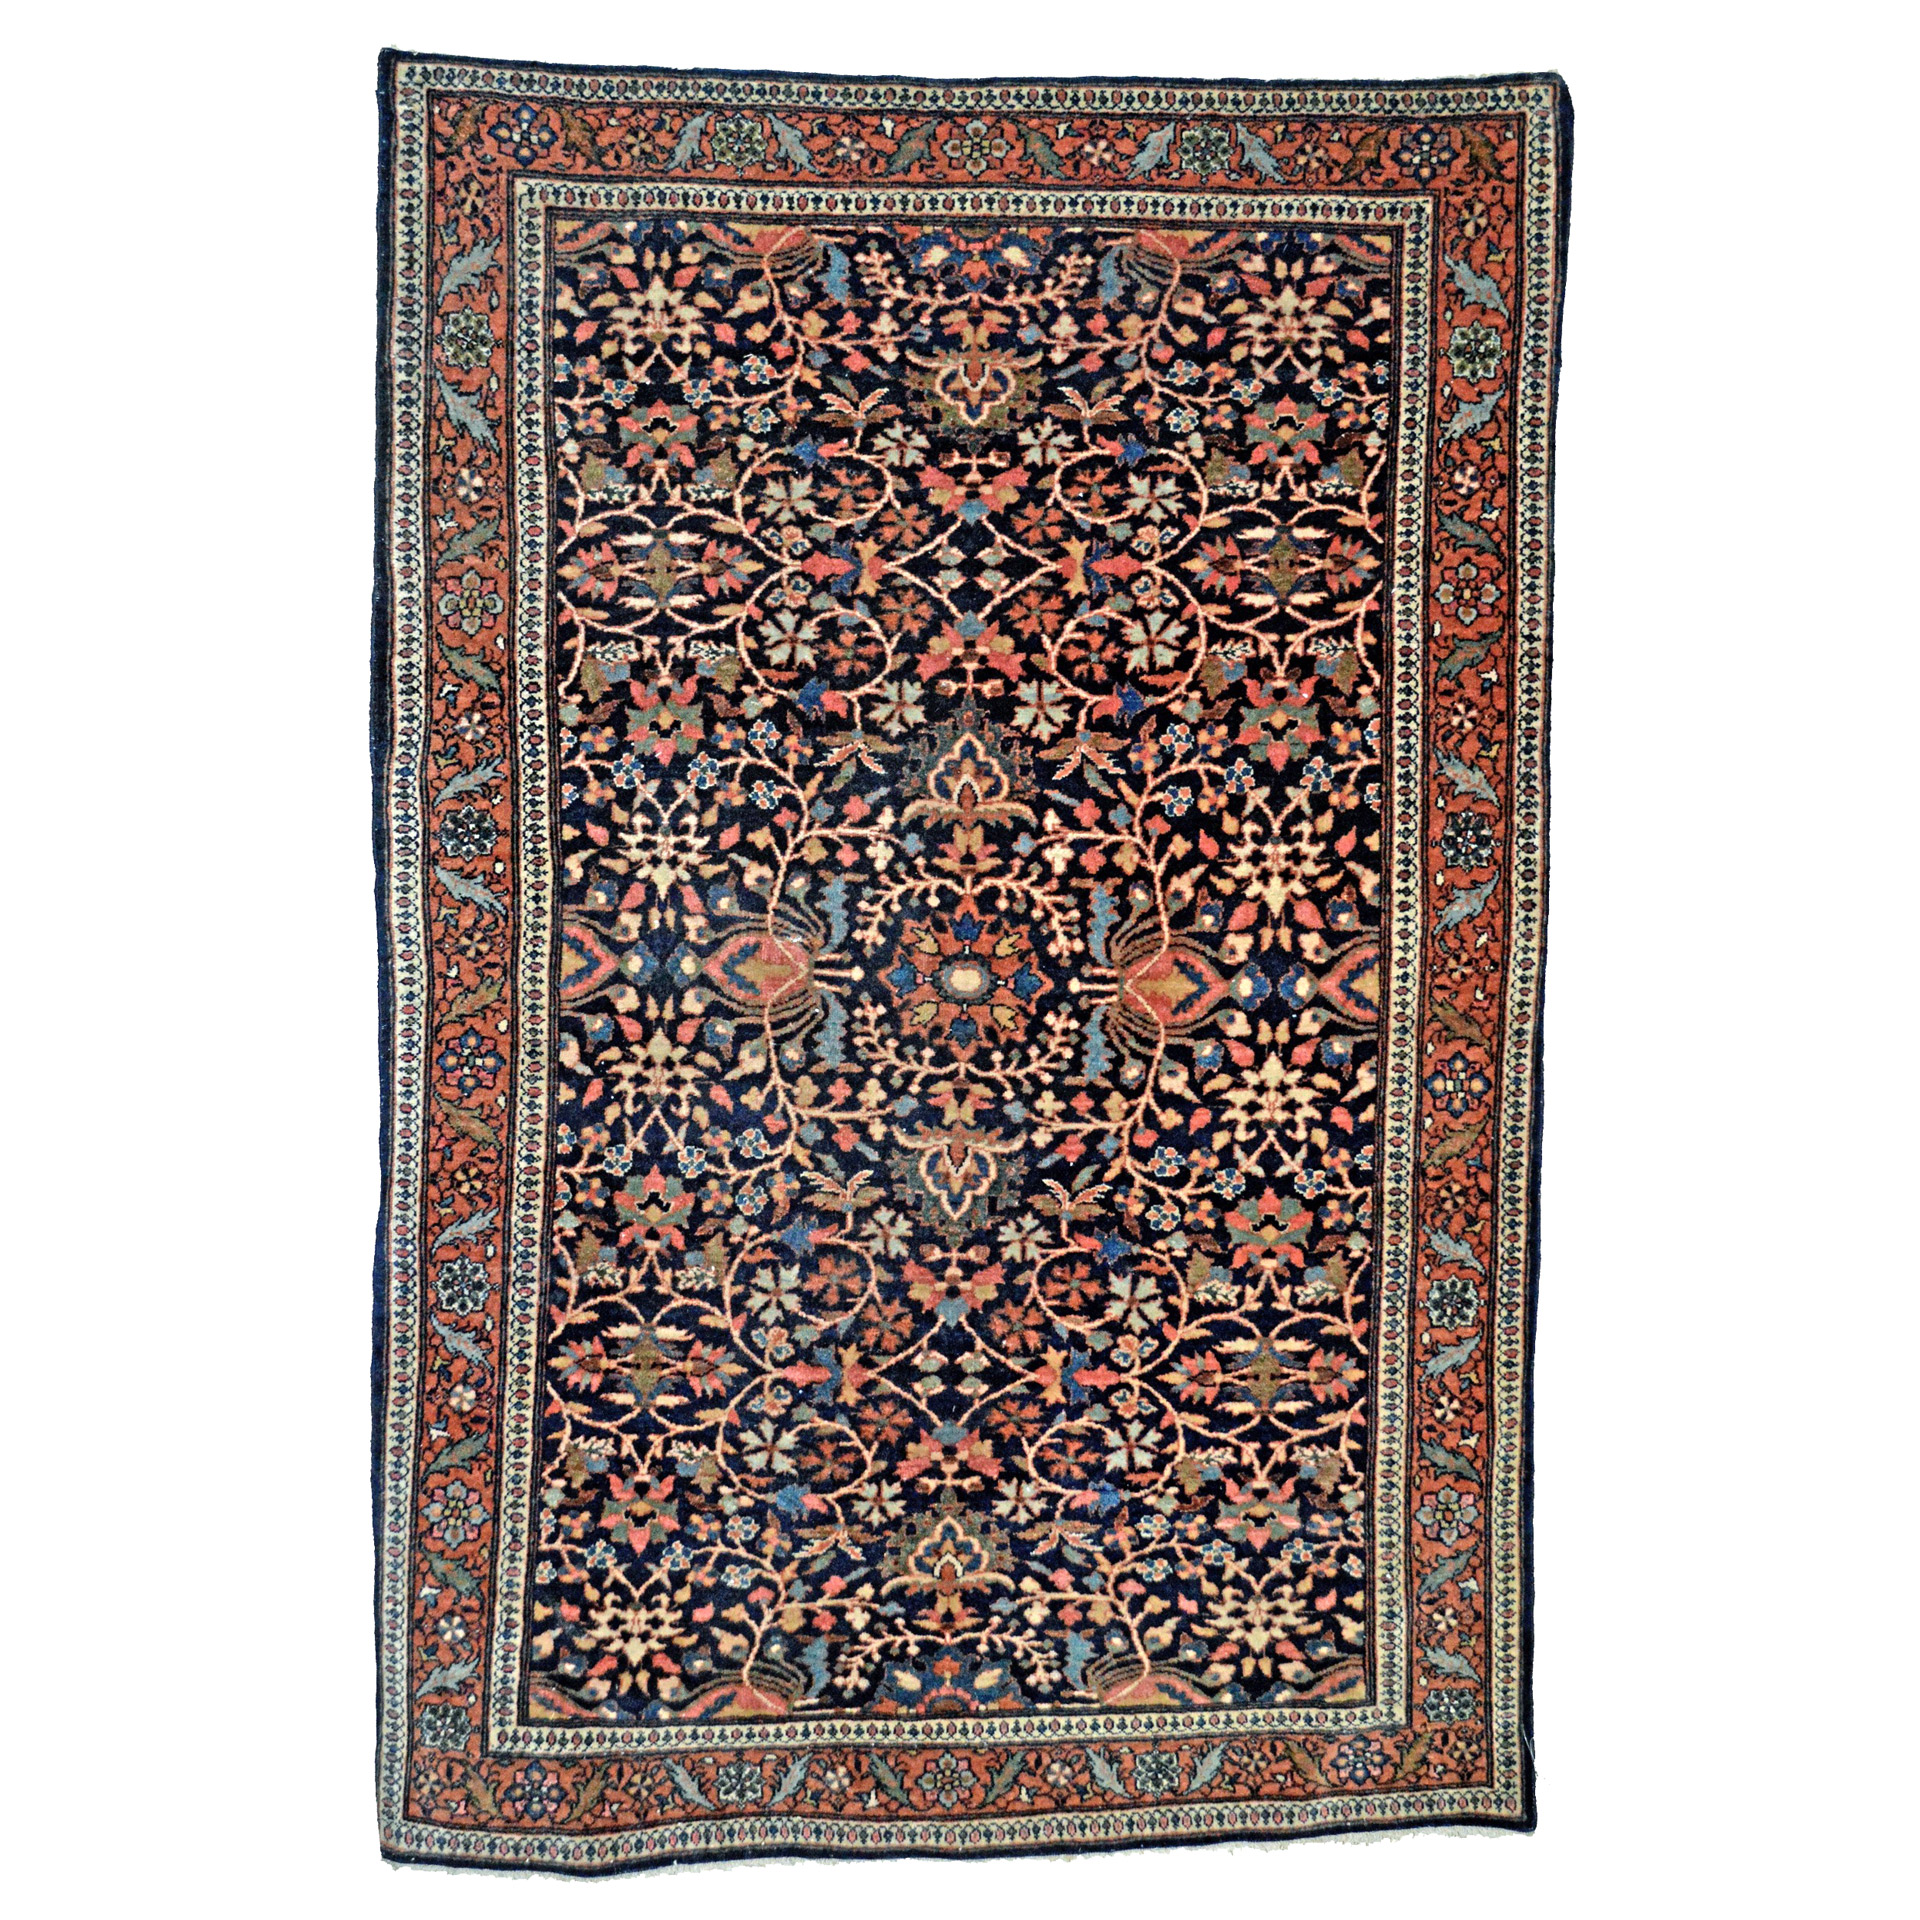 Douglas Stock Gallery Antique Oriental Rug Research Archives, antique Fereghan Sarouk rug with an all-over design on a navy blue field that is framed by a terra cotta color border, central Persia, circa 1910, antique Oriental rugs Boston,MA area